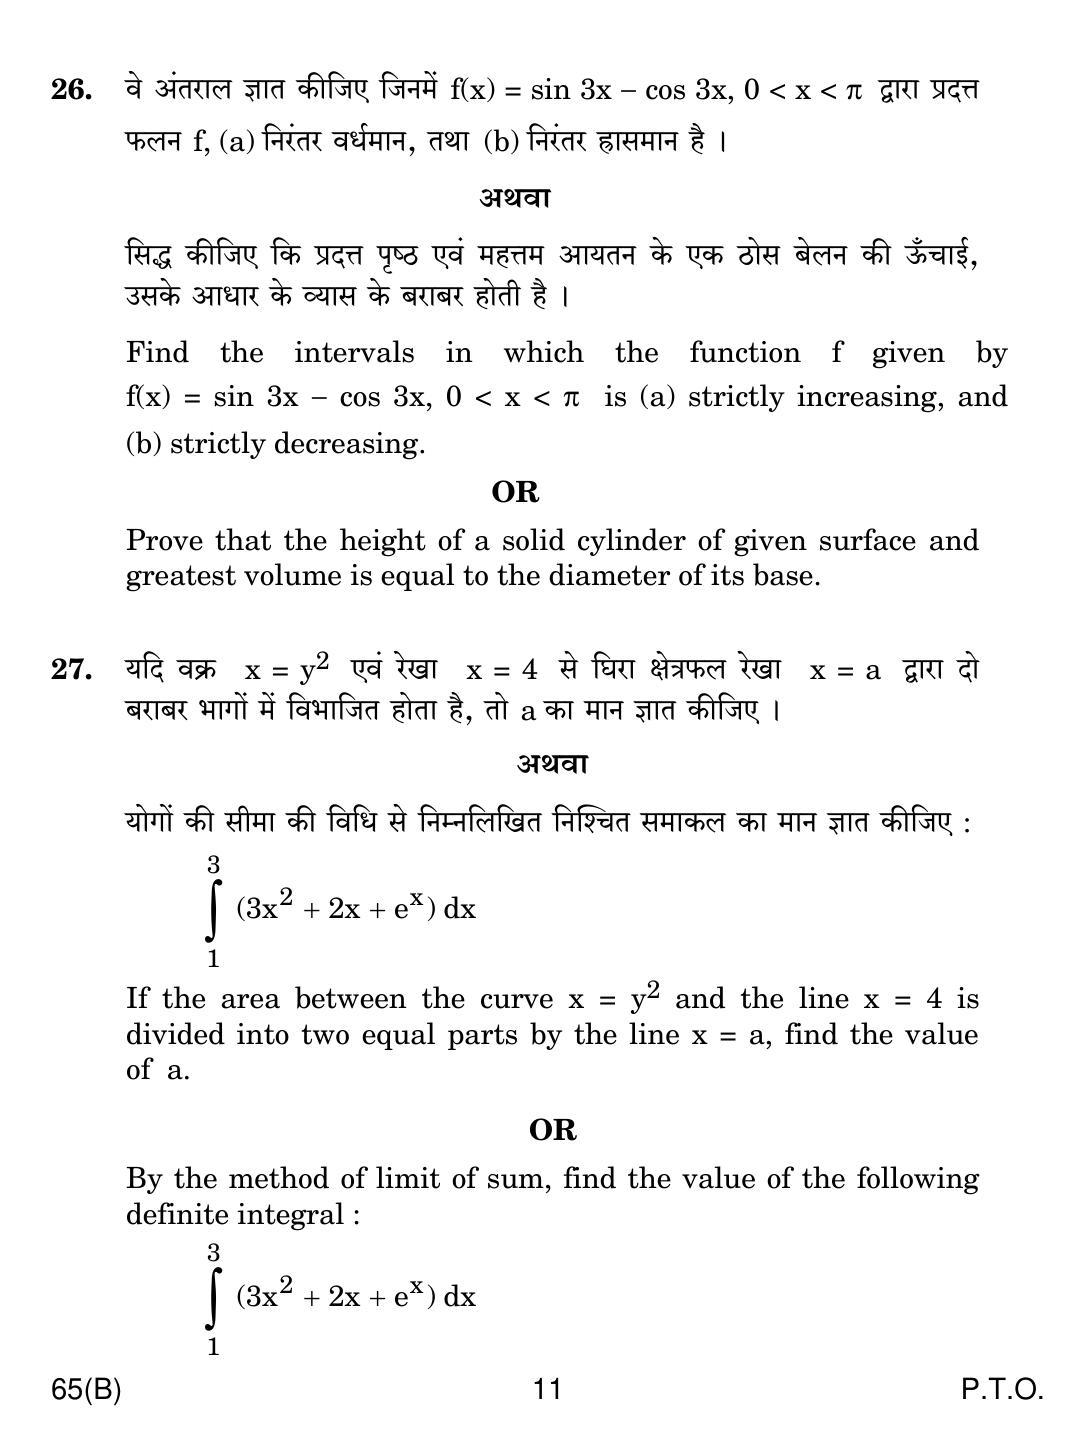 CBSE Class 12 65(B) MATHS FOR BLIND CANDIDATES 2018 Question Paper - Page 11